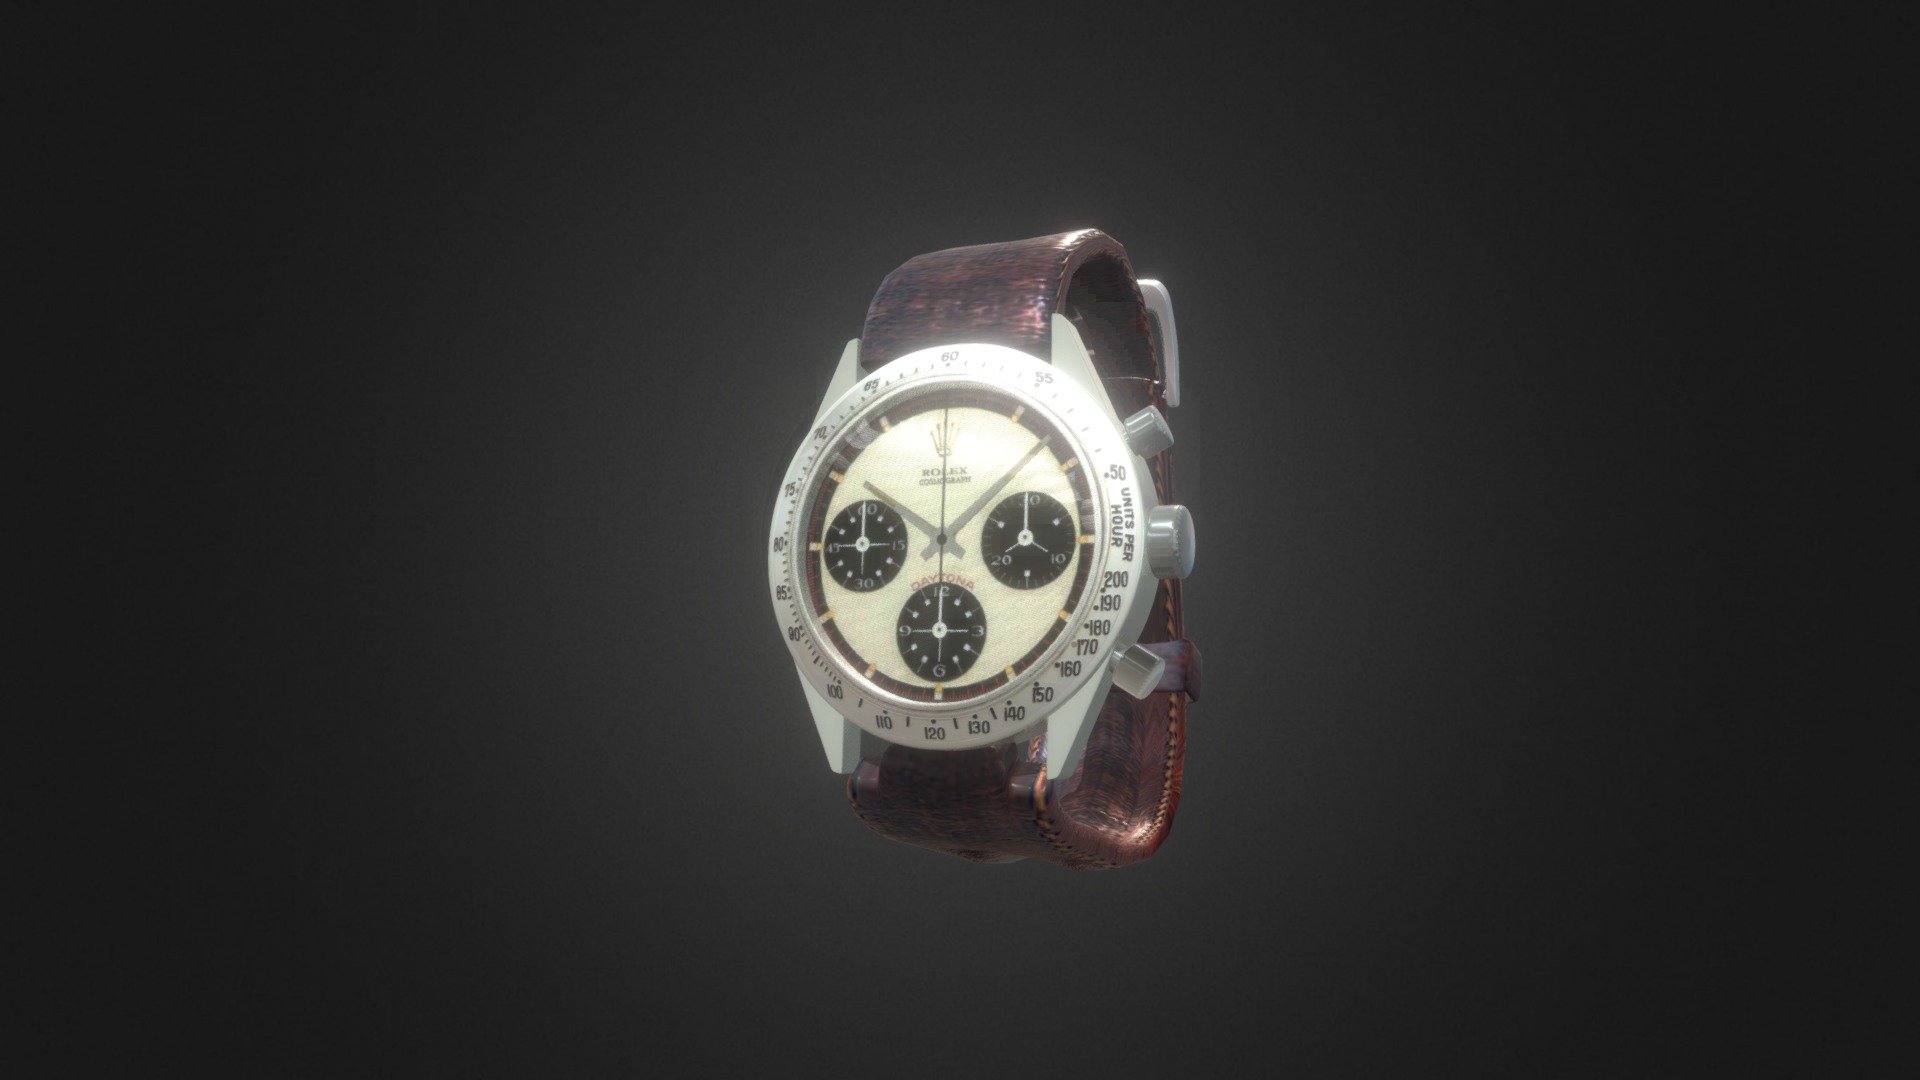 Download this wristwatch model for free, yeah I don't like to make you upset just because it isn't free. Your welcome, yes, but it isn't that good model. Well, hope you liked the model, was quite hard to make, not bad though. Have a good day!
My Sketchfab: https://sketchfab.com/mehzabinmisha246
My best model: https://skfb.ly/oD7JL - Rolex Cosmograph Daytona Paul Newman 6239 - Download Free 3D model by mehzabinmisha246 3d model